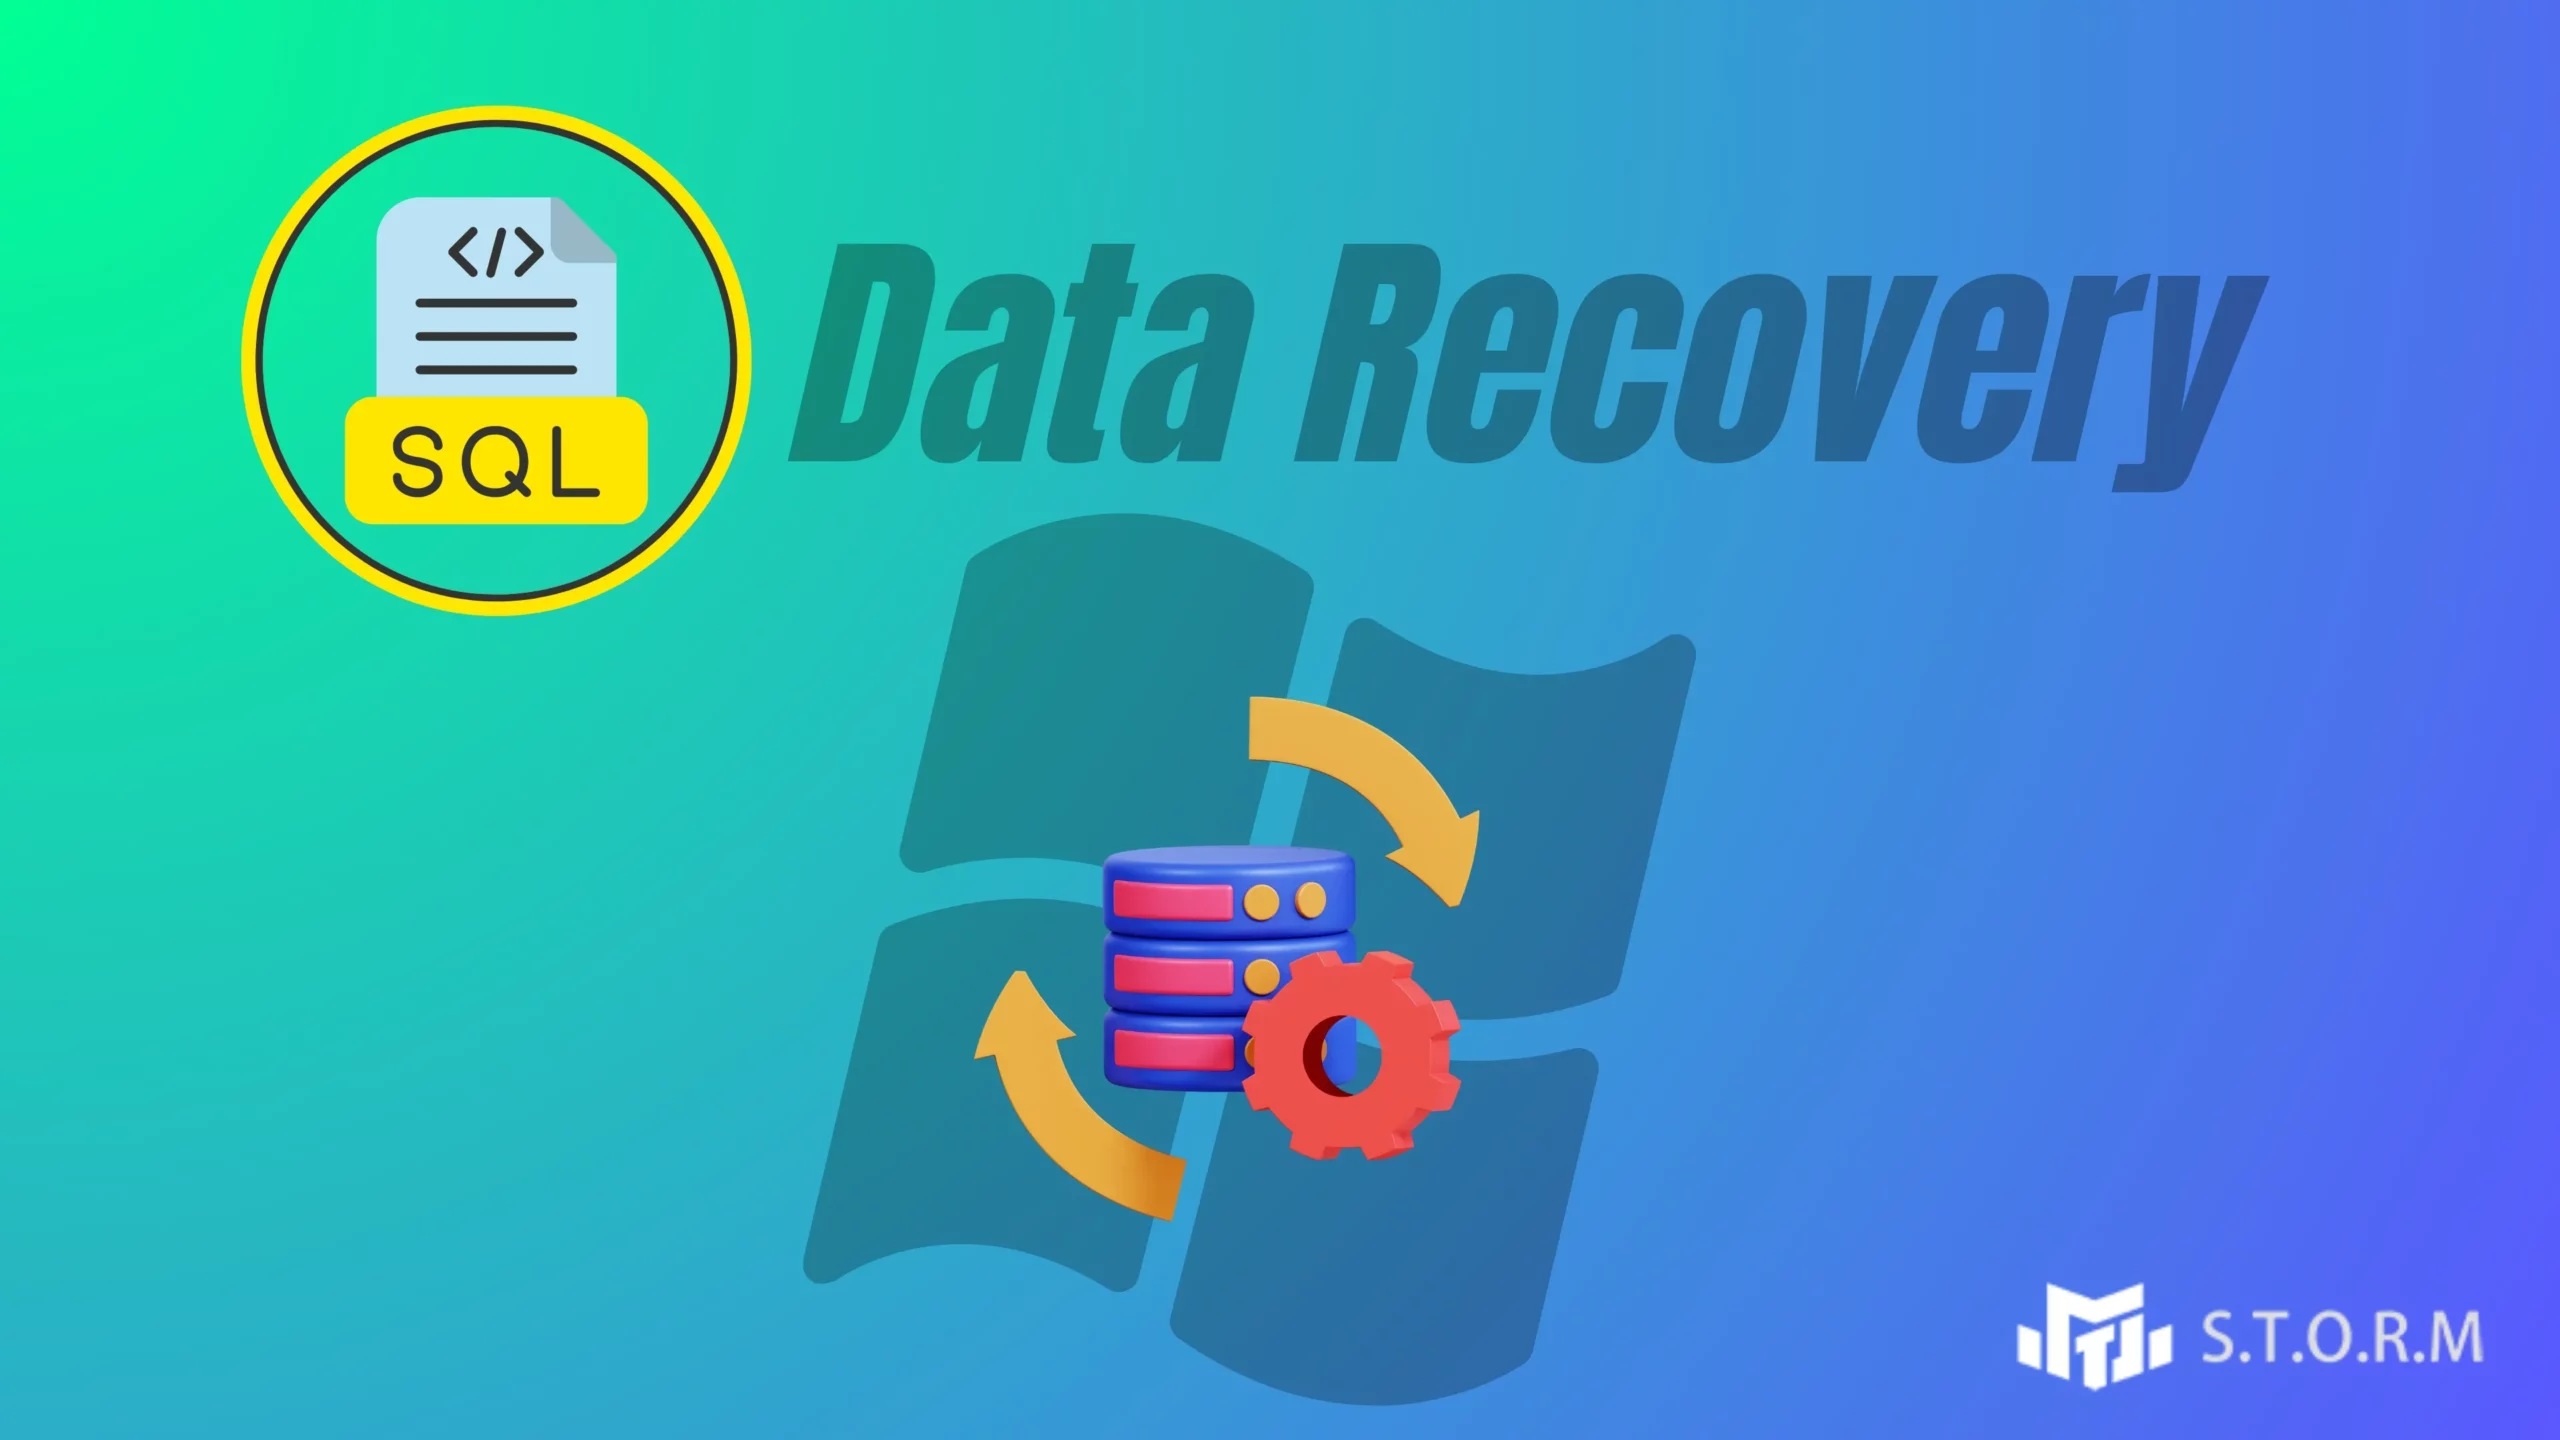 mtm-database-recovery-review:-for-mysql-&-sql-server